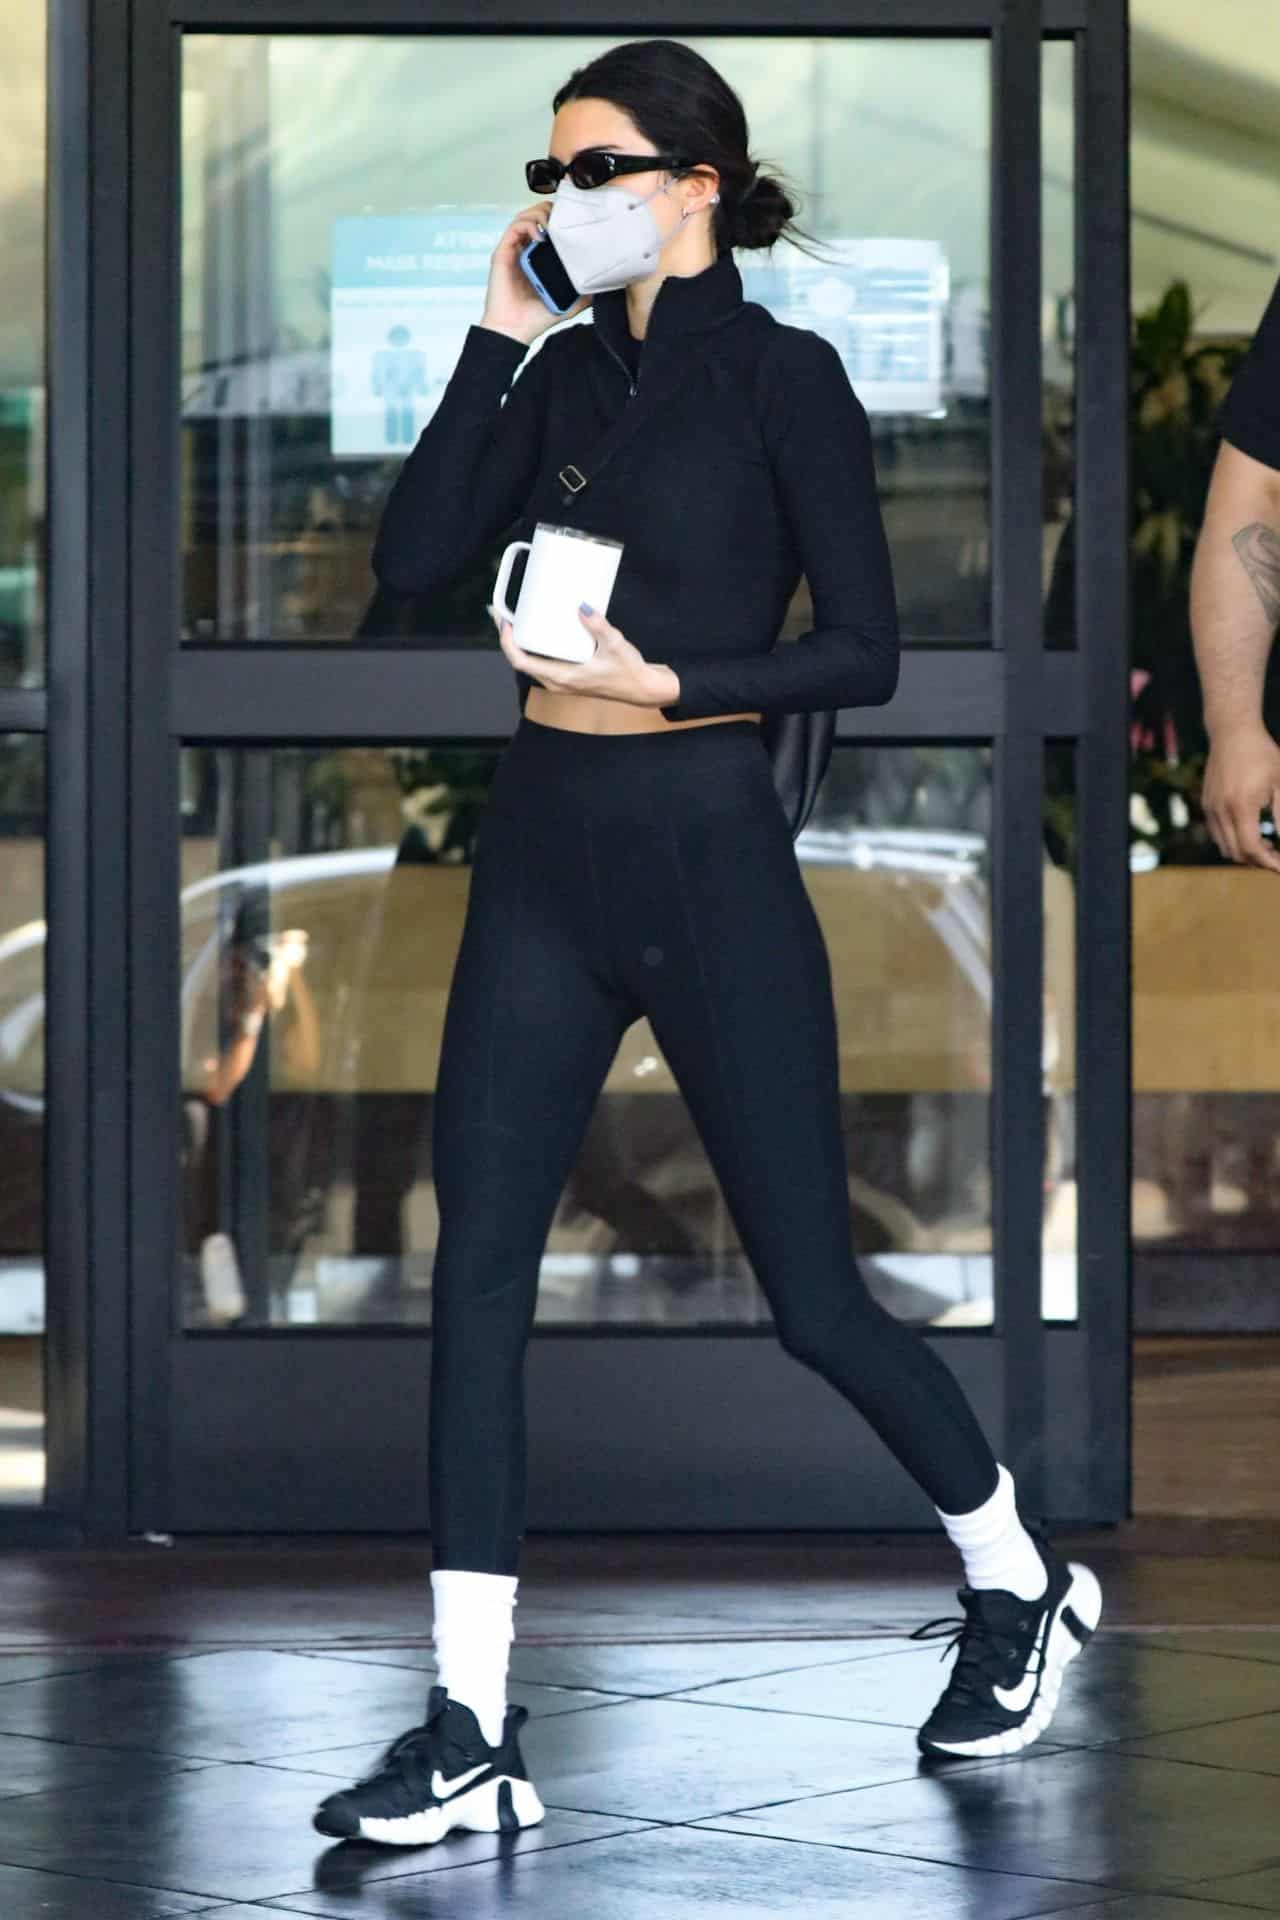 Kendall Jenner Wears a Tight Chic Outfit for a Business Meeting in LA